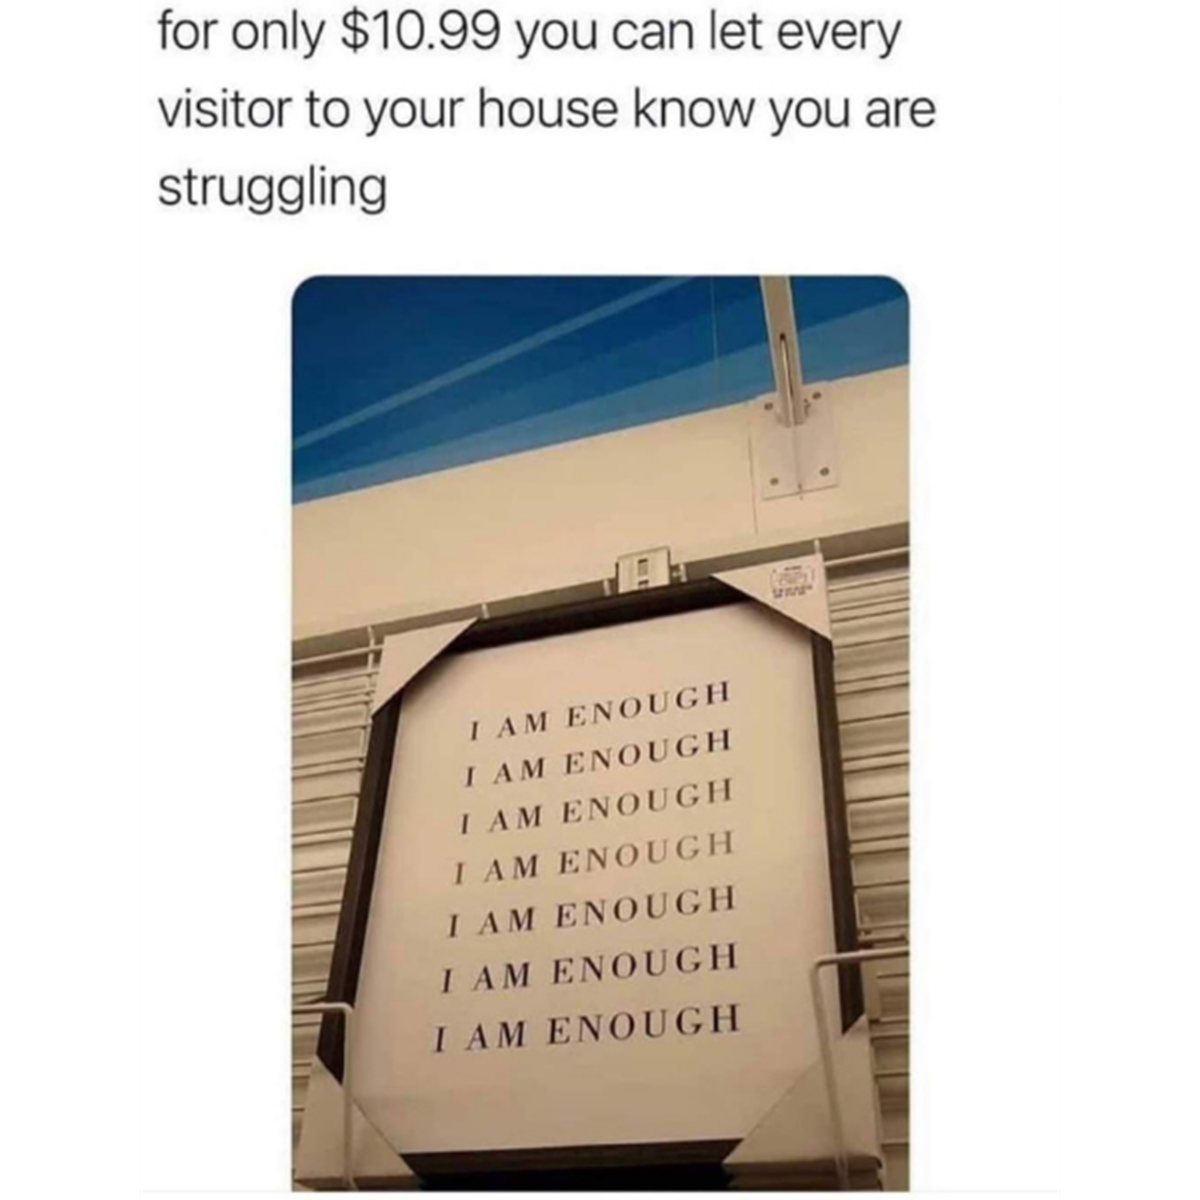 only $10.99 you can let every visitor - for only $10.99 you can let every visitor to your house know you are struggling A I Am Enough I Am Enough I Am Enough I Am Enough I Am Enough I Am Enough I Am Enough